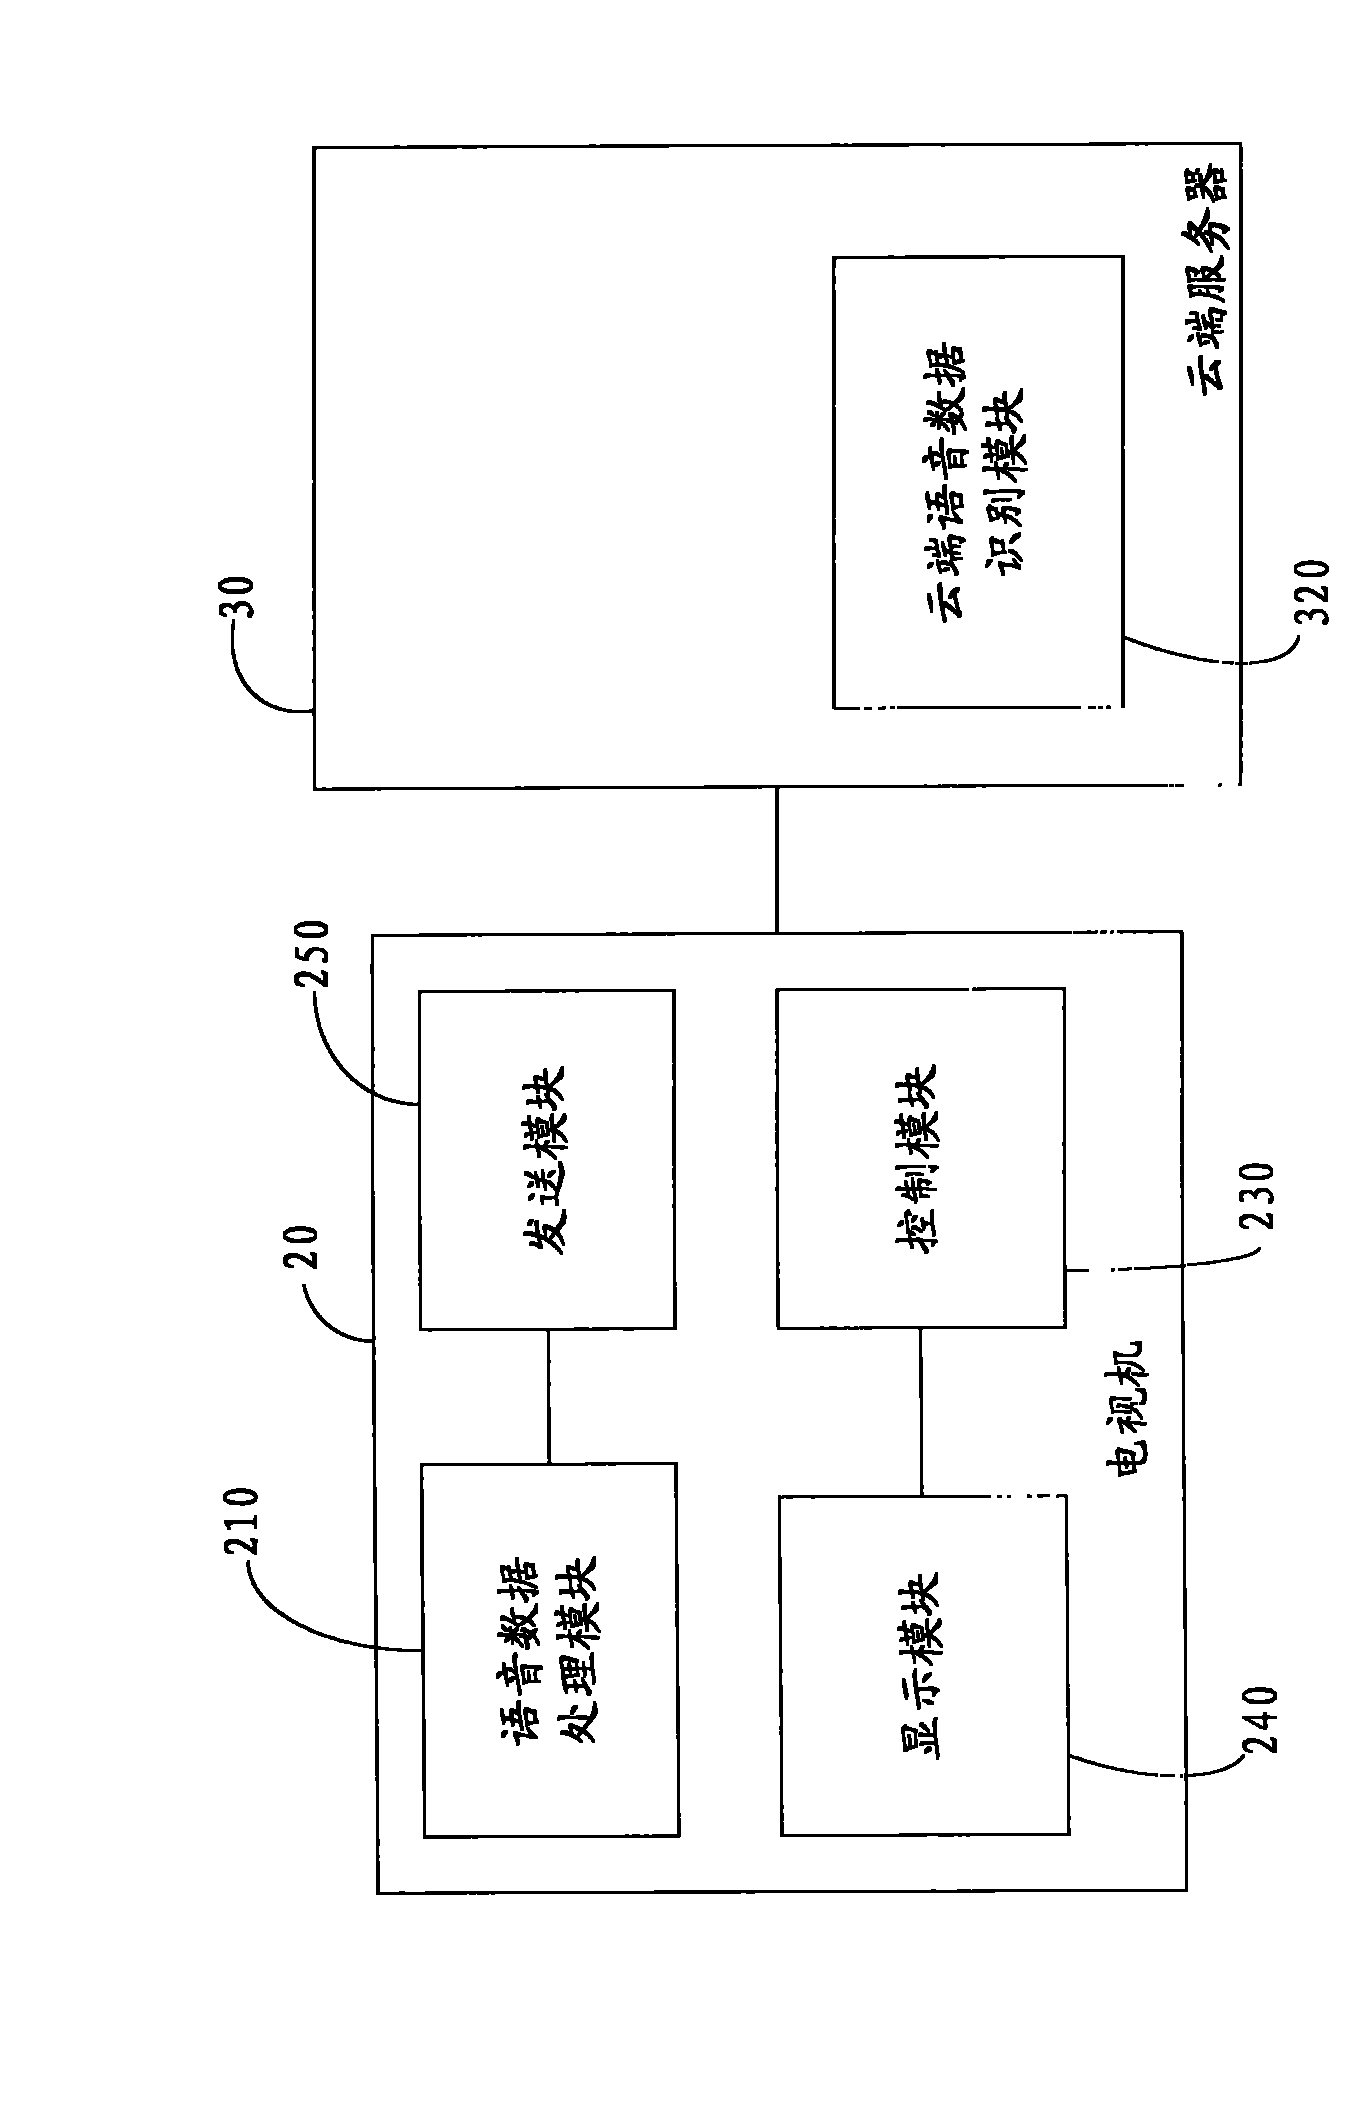 Voice controlled television, television system and method for controlling television through voice